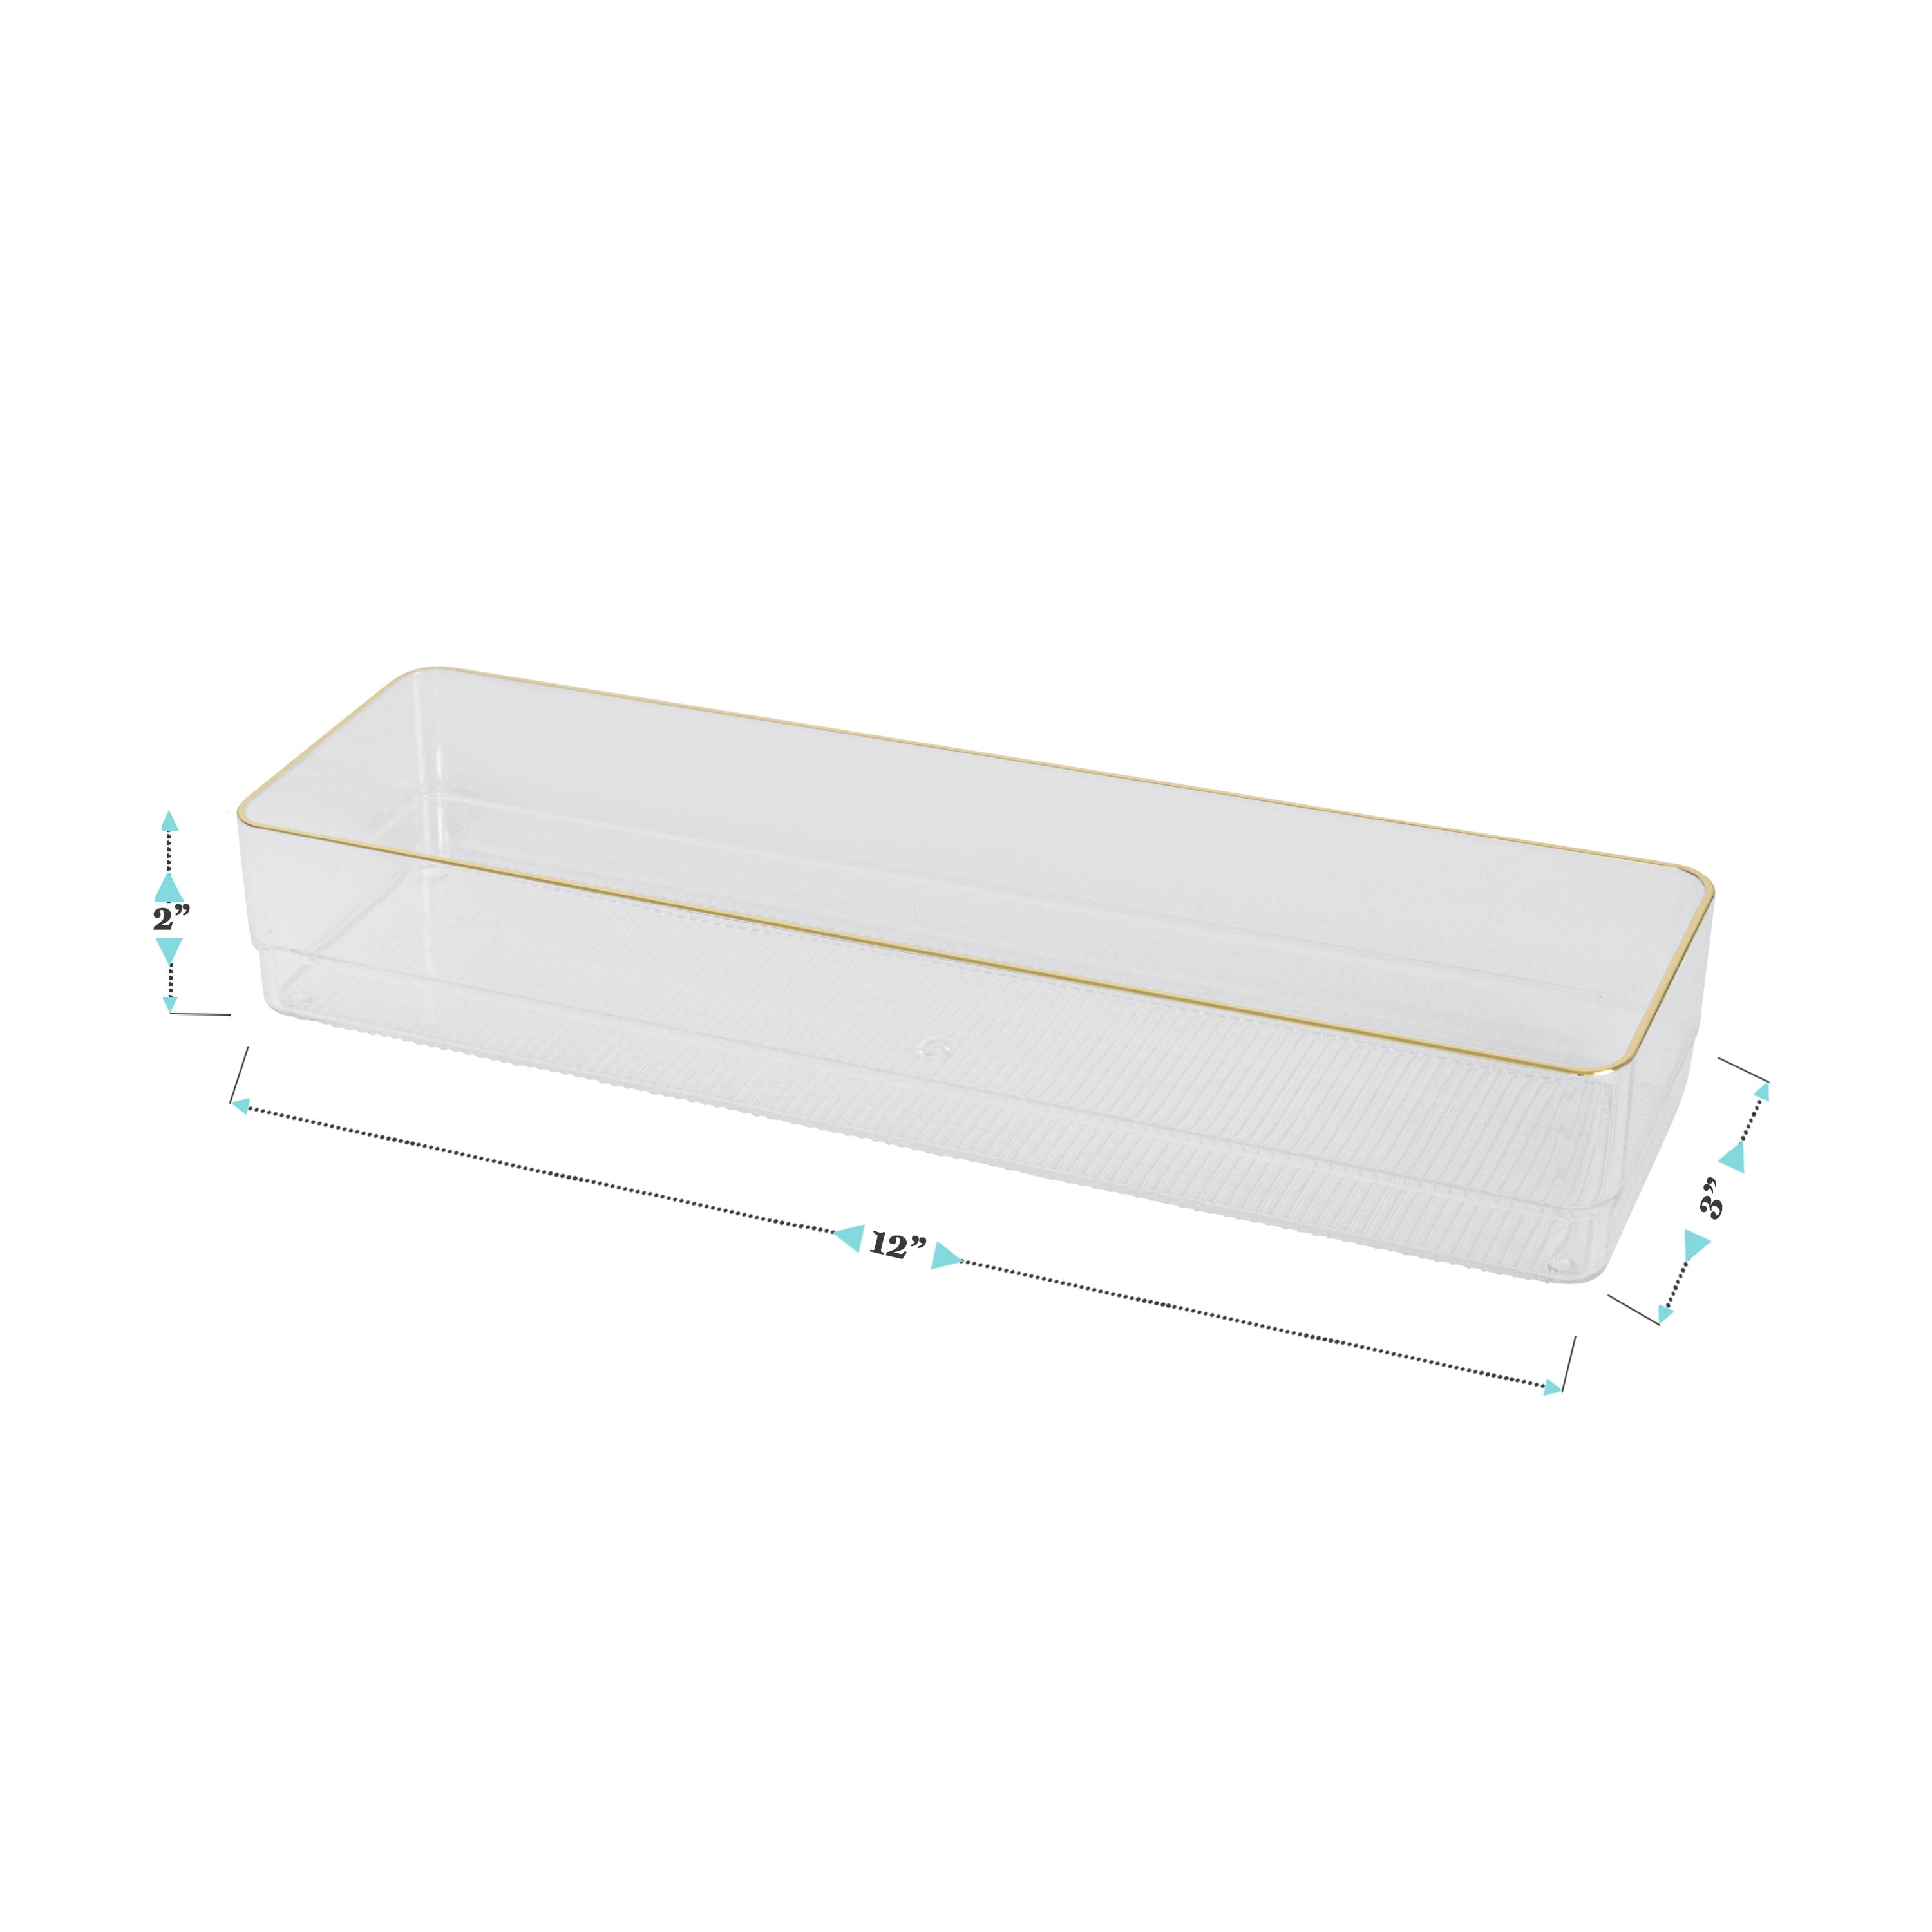 Martha Stewart Kerry Plastic Stackable Office Desk Drawer Organizers, 12 x 3, 6 Pack, with Gold Trim